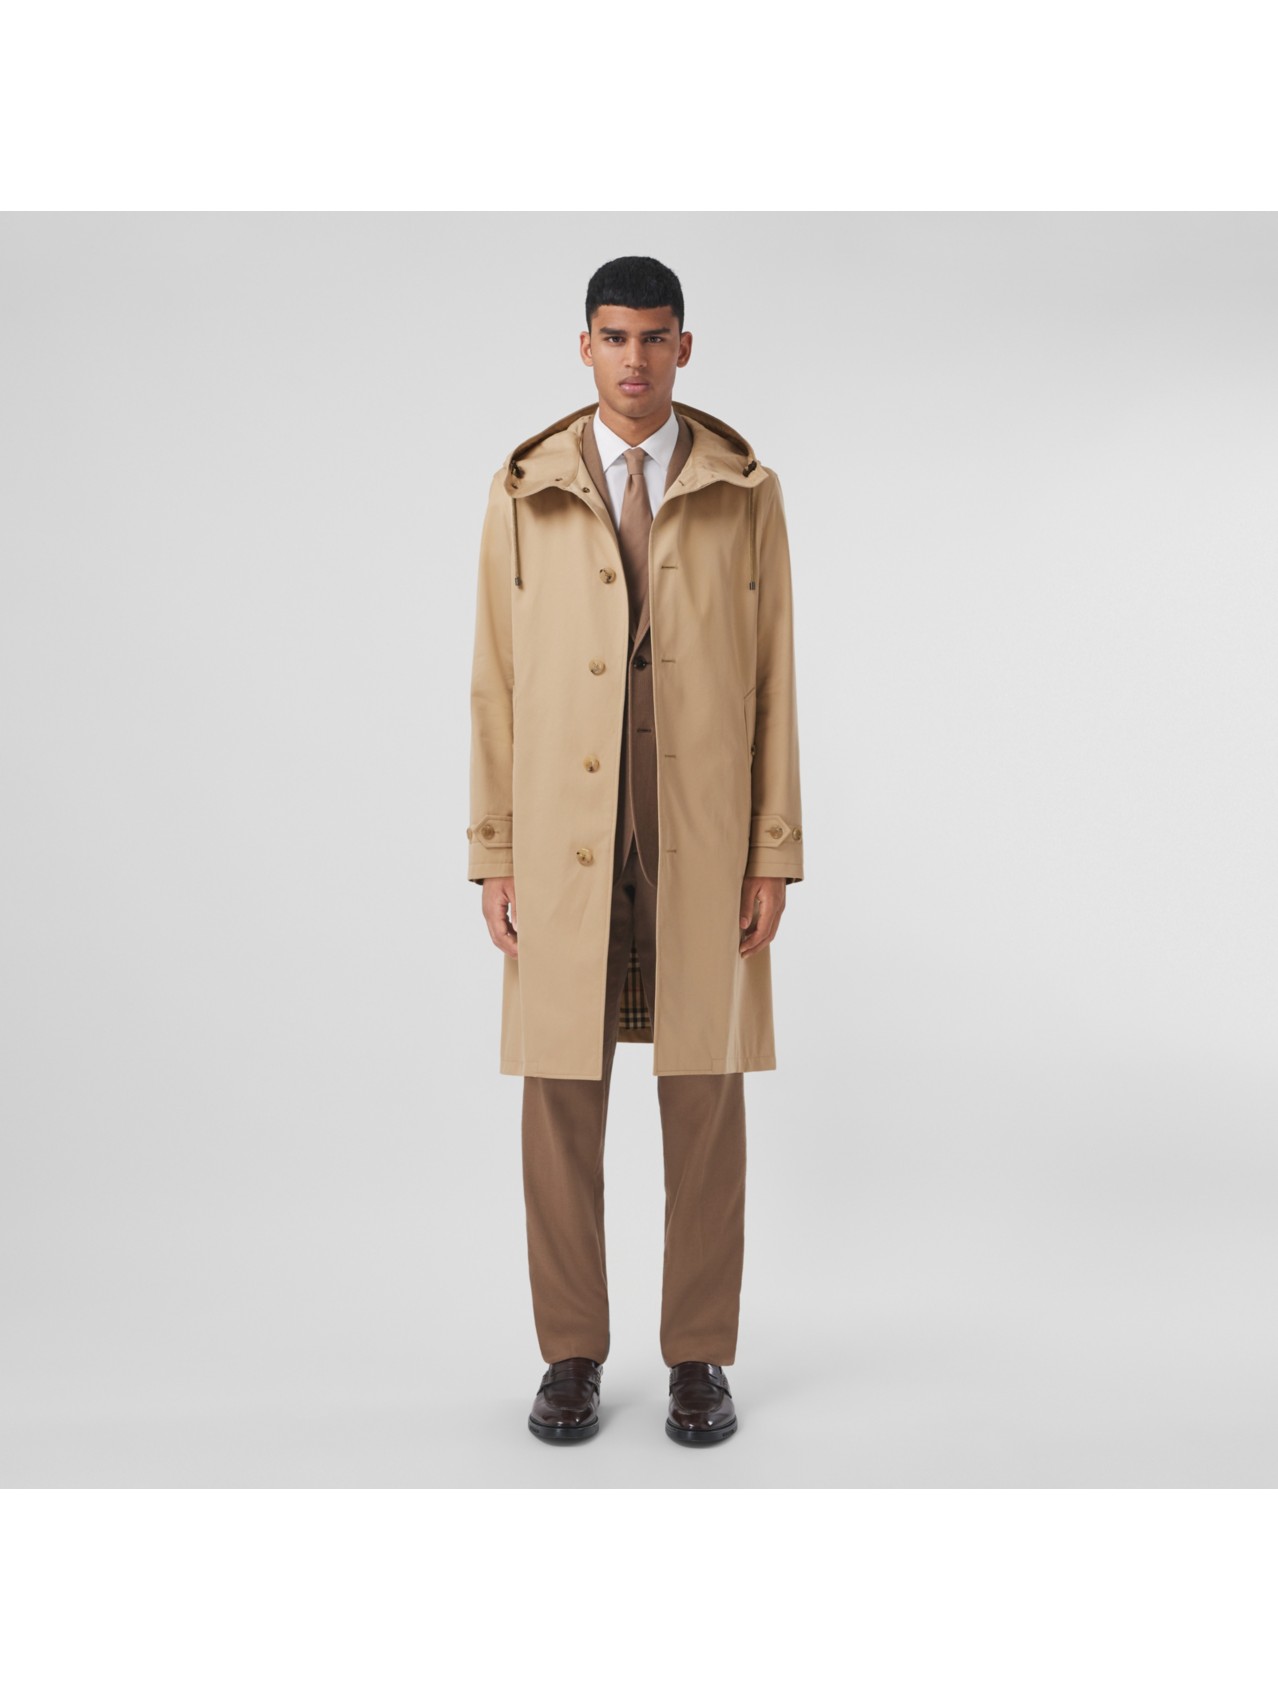 New Burberry Trench in stadium promotions